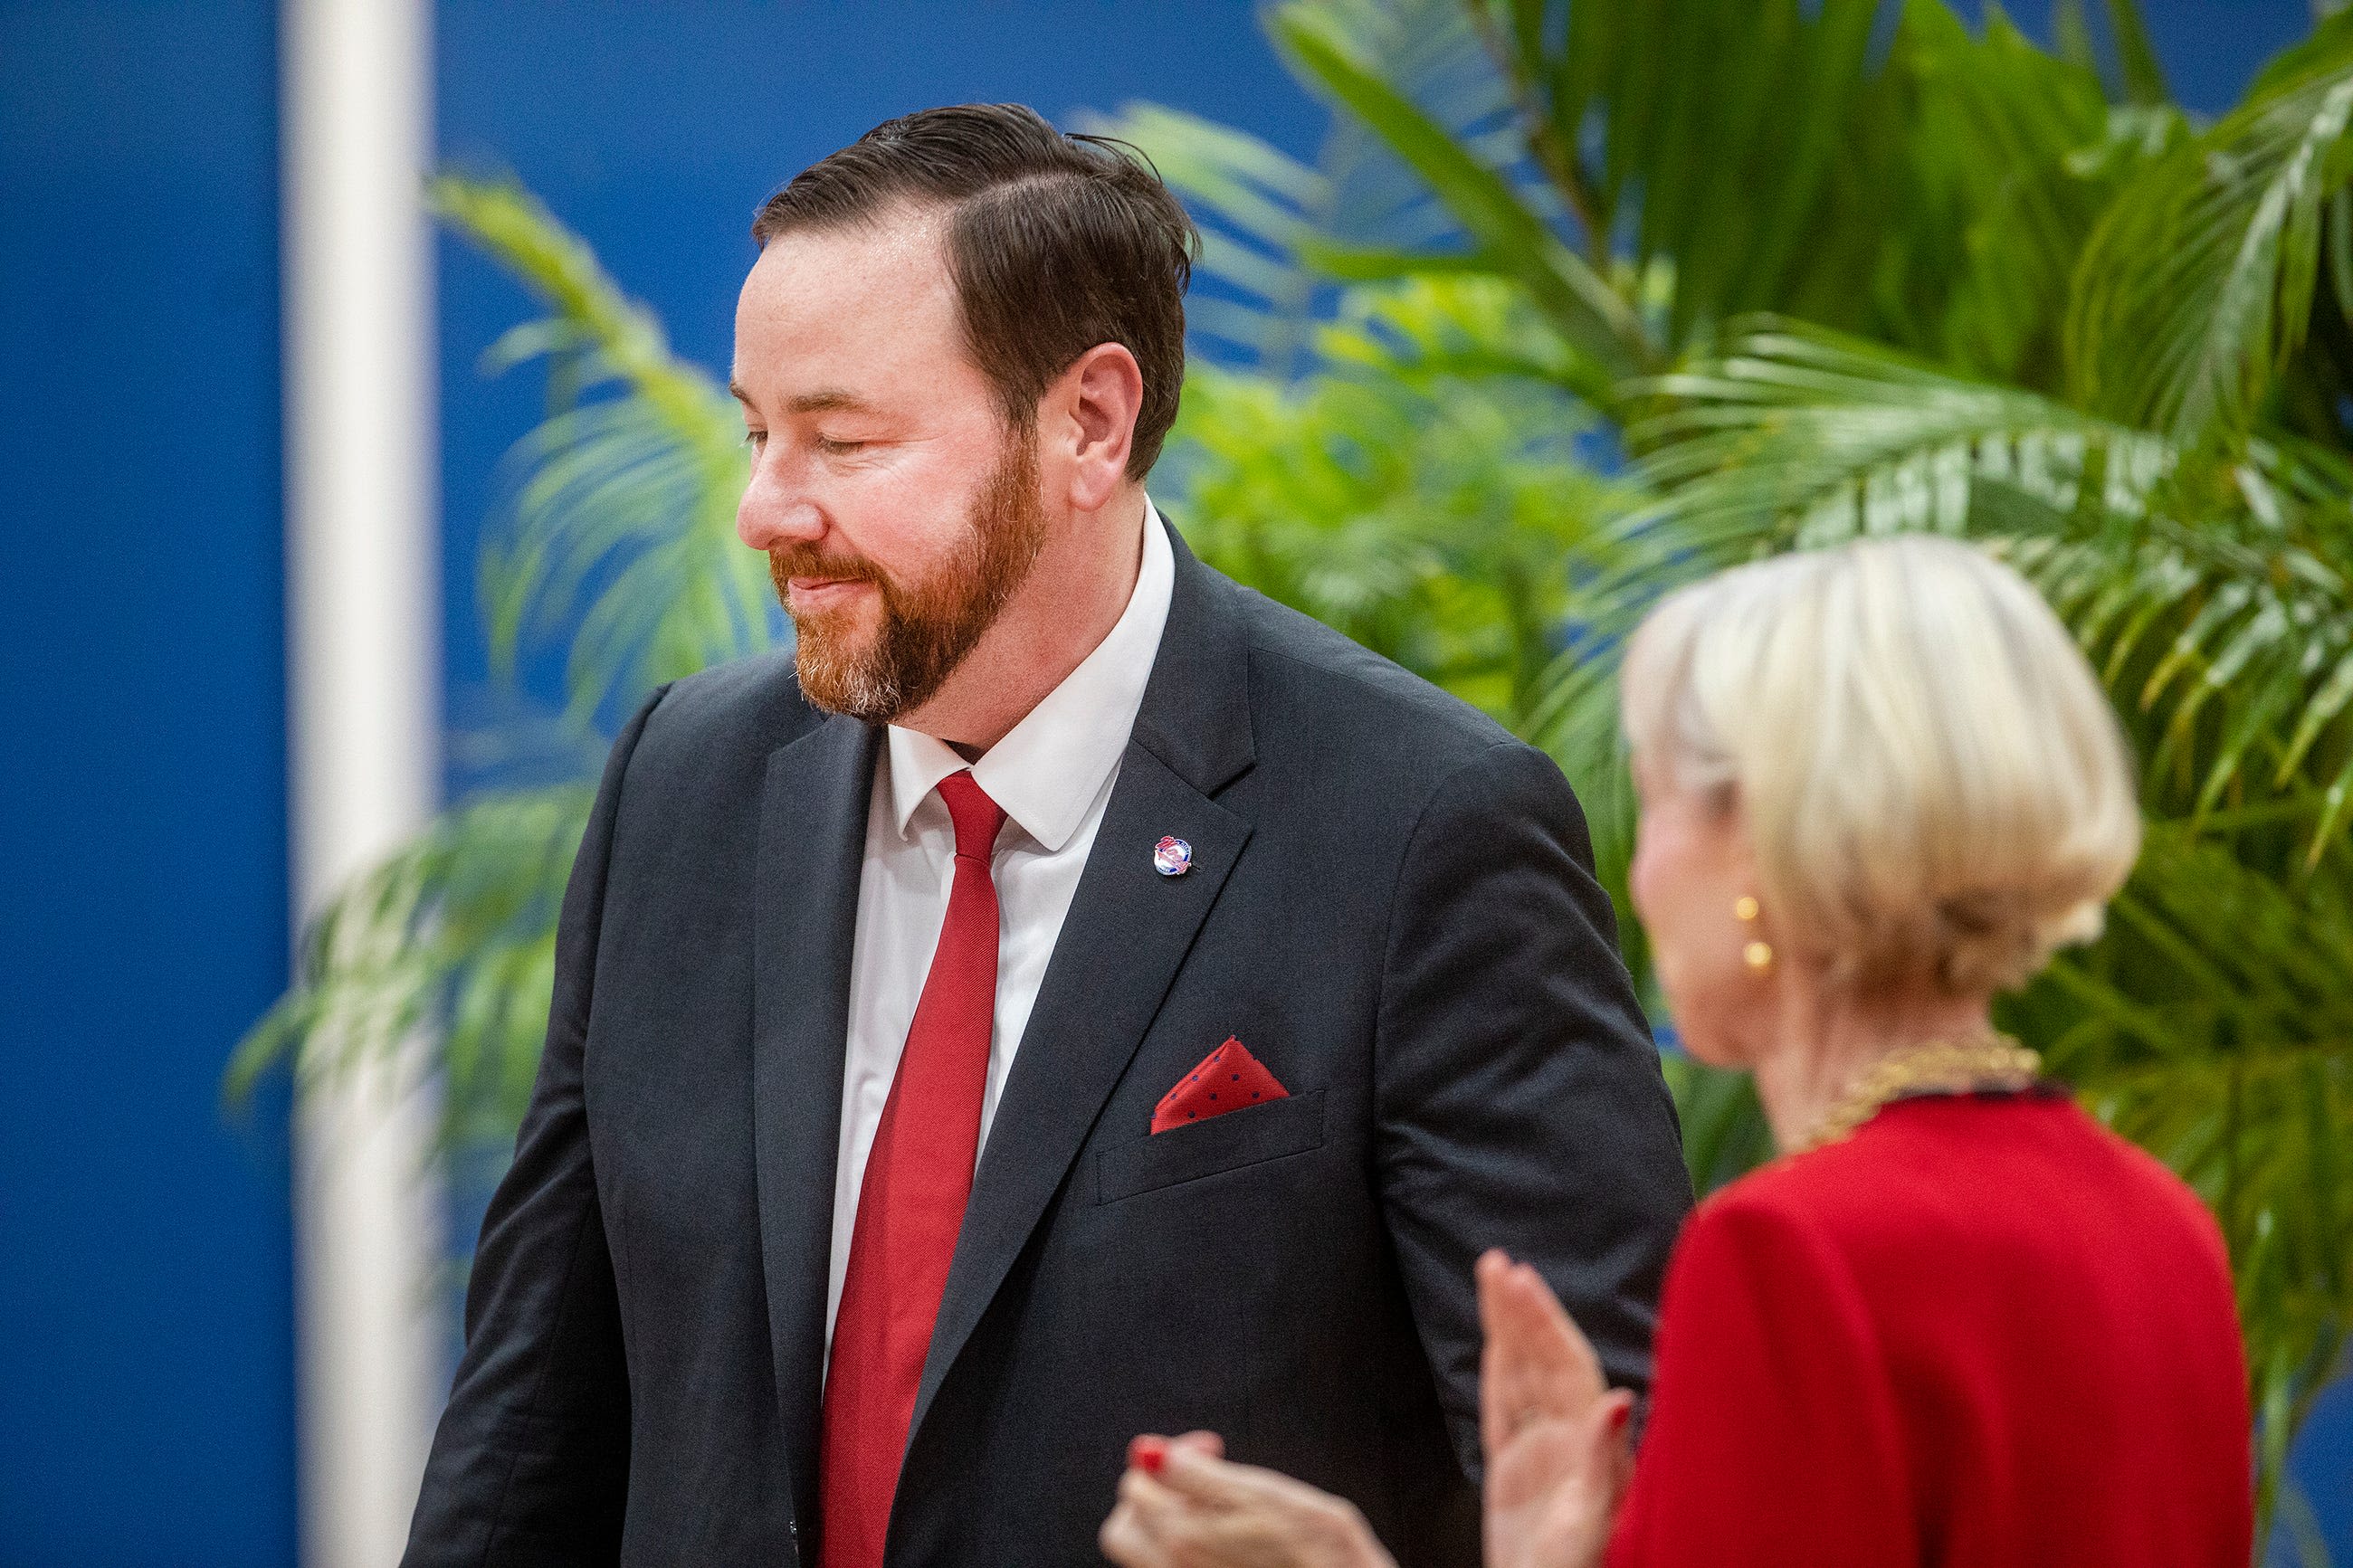 Florida Southern College in Lakeland introduces Jeremy Martin as next president